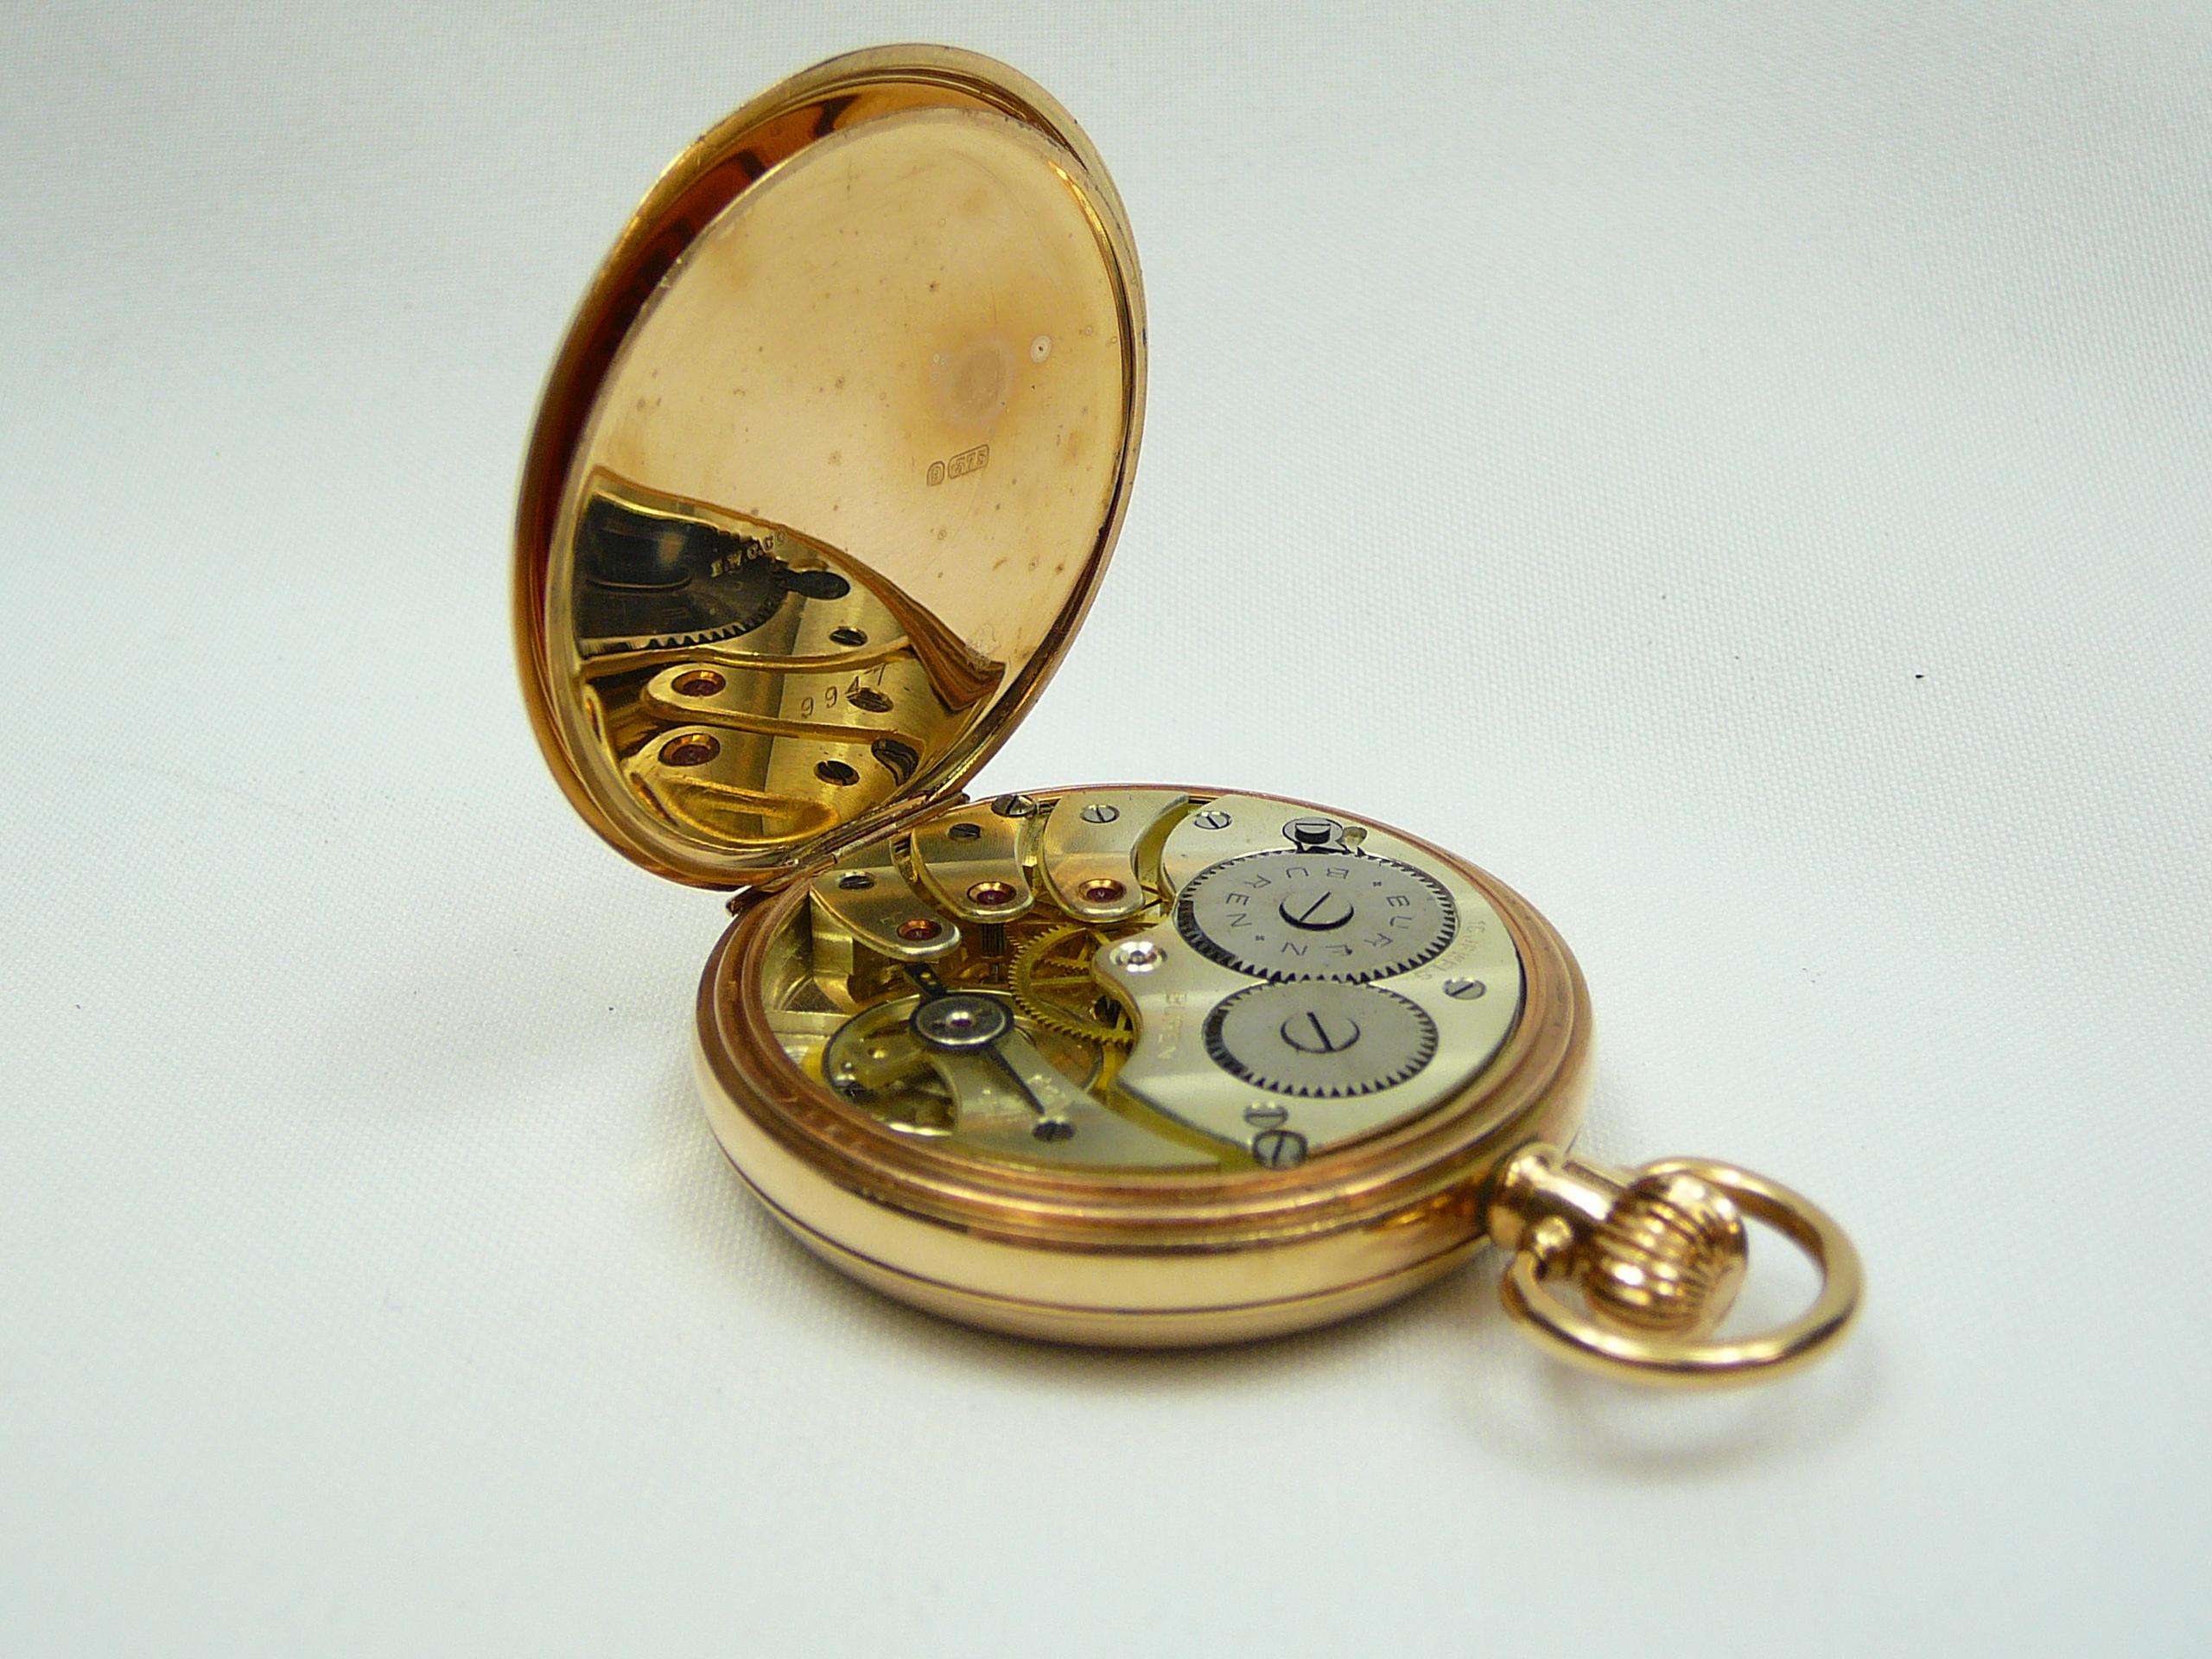 Gents Antique Gold Pocket Watch - Image 4 of 5